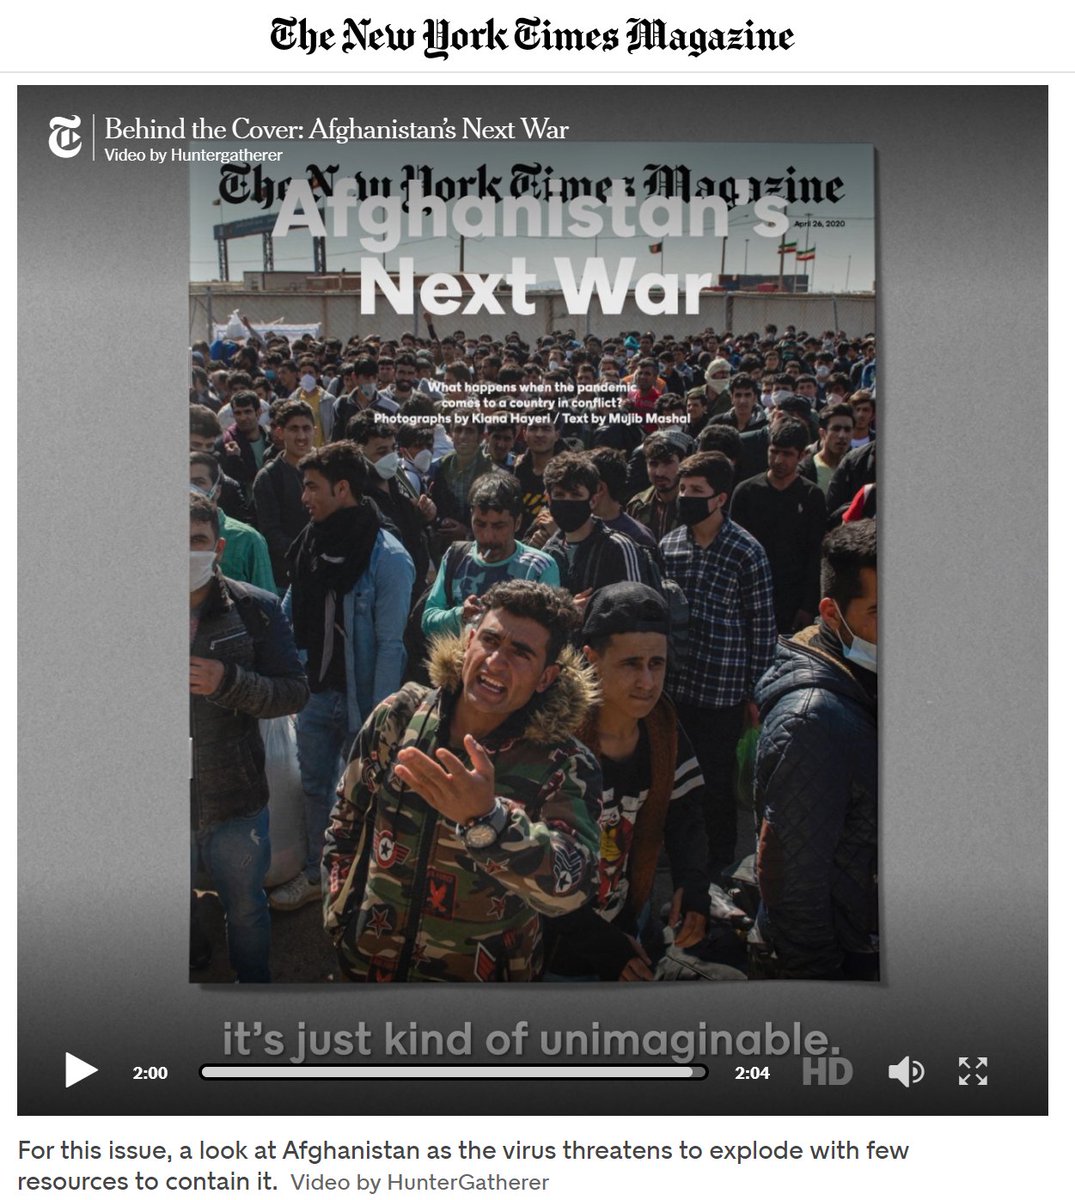 11/x This week's  @NYTmag features a cover story by  @MujMash on how  #Coronavirus has hit Afghanistan.Watch the Behind the Cover Video here: https://www.nytimes.com/2020/04/24/magazine/behind-the-cover-afghanistans-next-war.htmlcc:  @jakesilverstein  @GailBichler  #NYReadalong https://twitter.com/MujMash/status/1252894320908292096